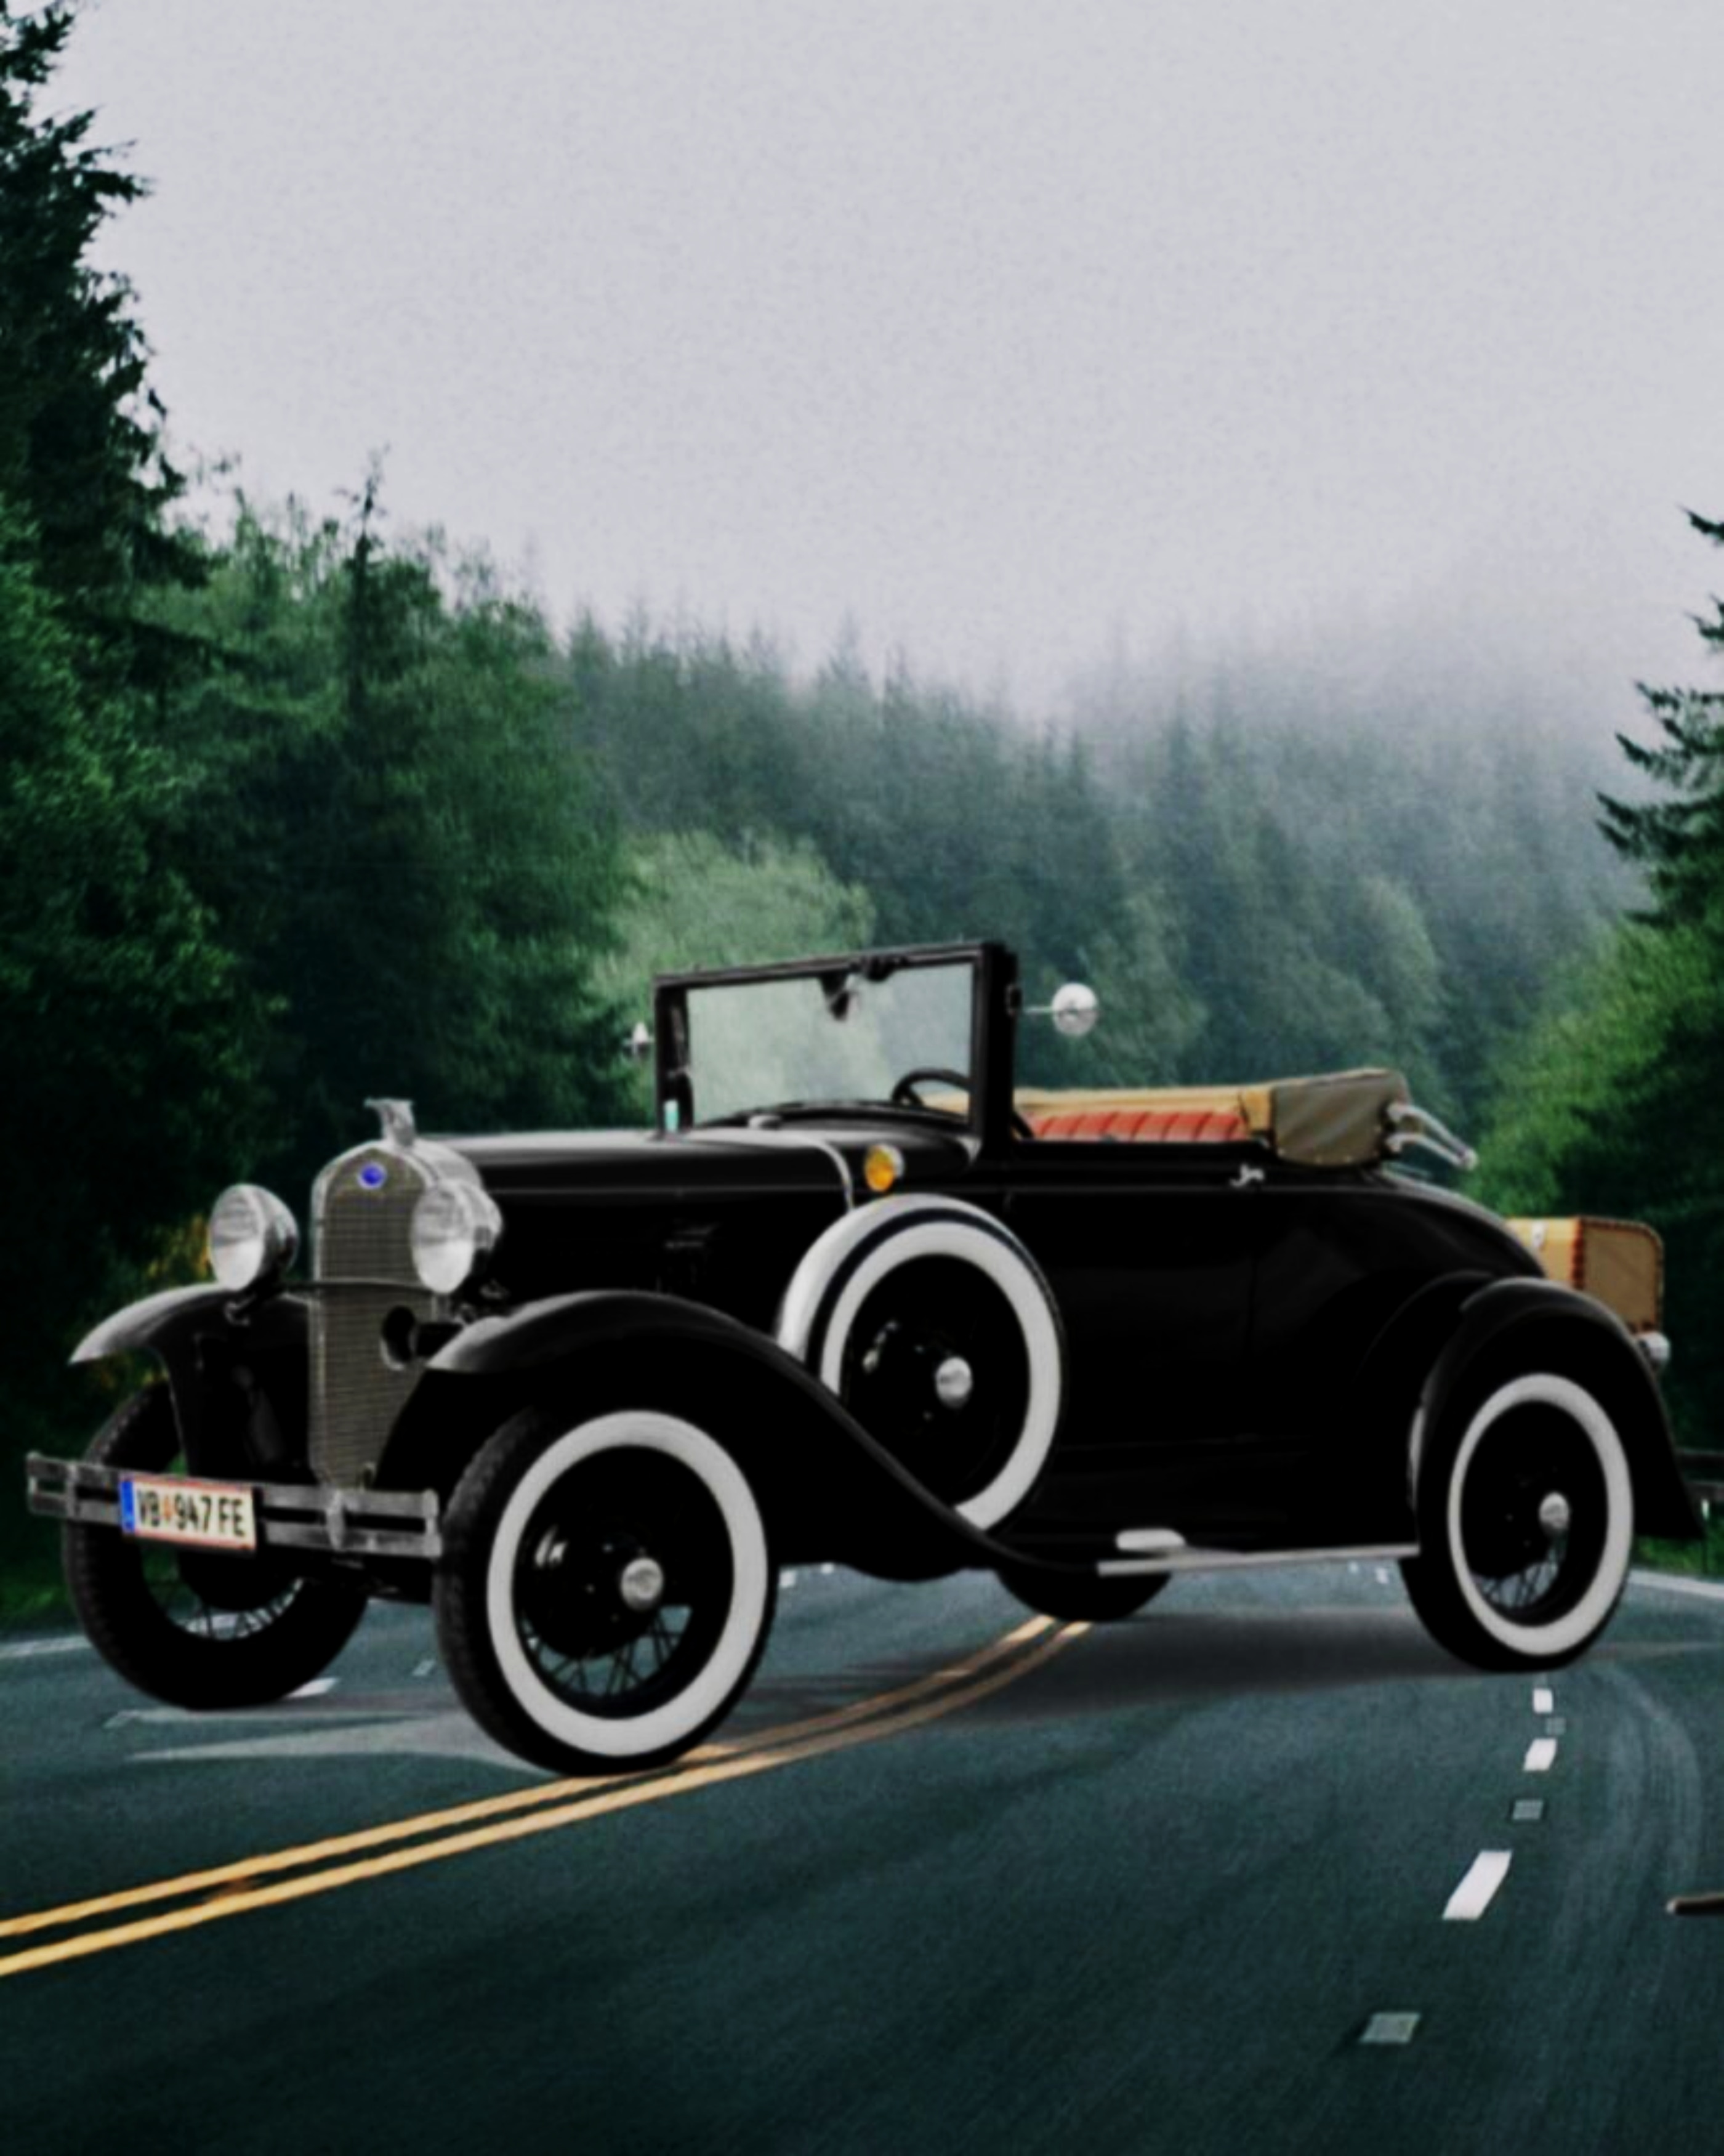 You are currently viewing Royal car image editing background download free